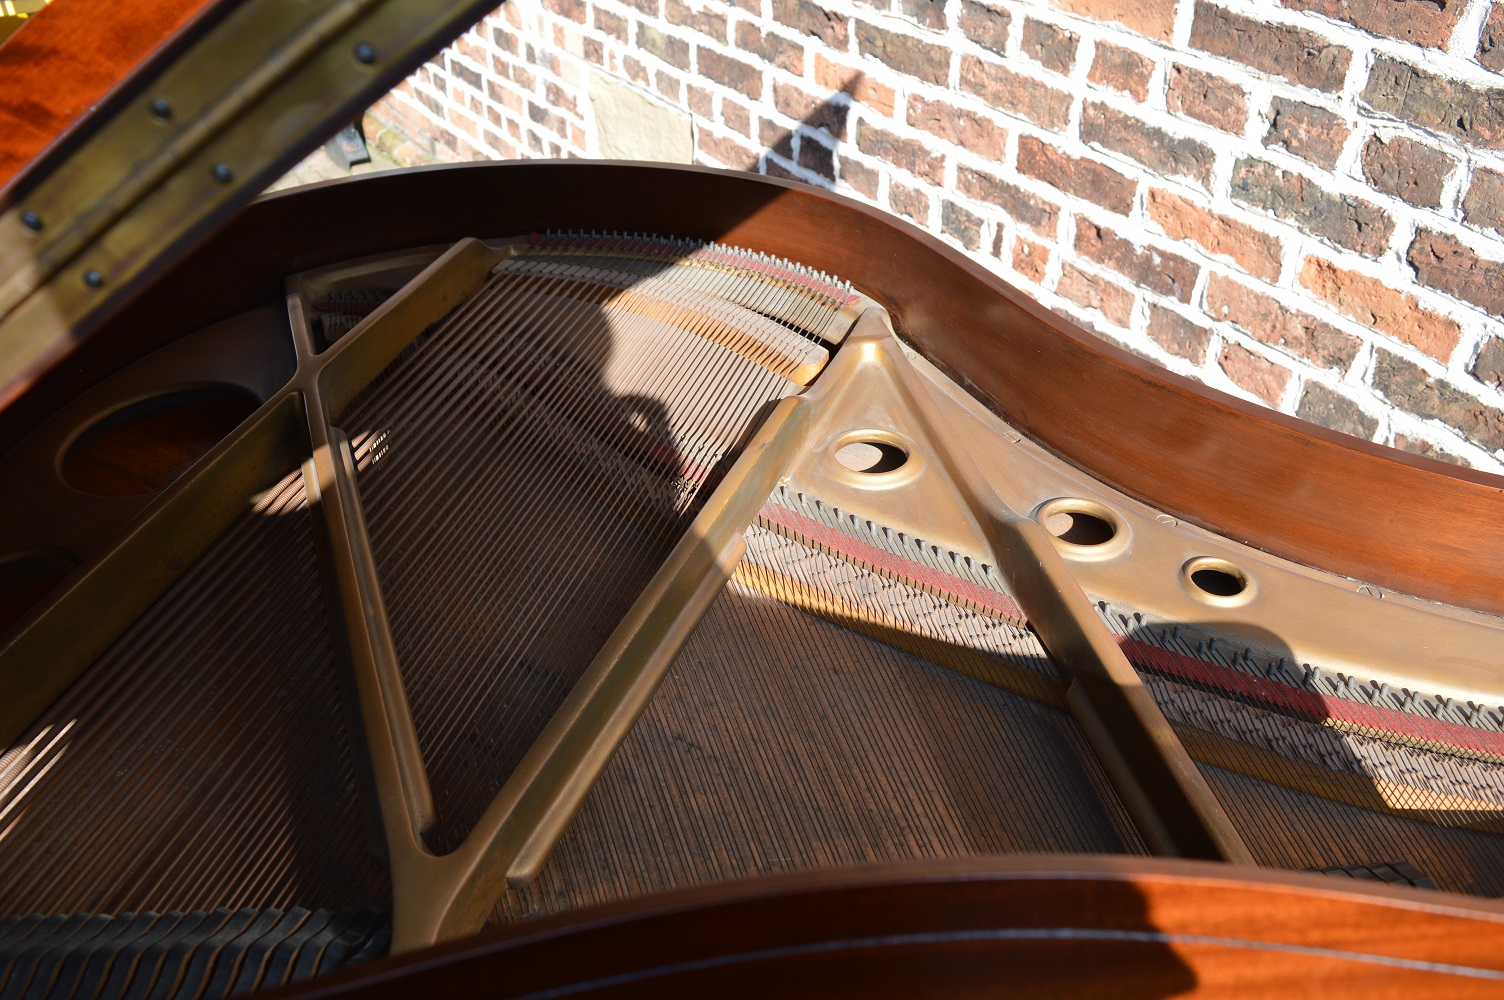 Steck baby grand piano in mahogany. 4ft - Image 4 of 5